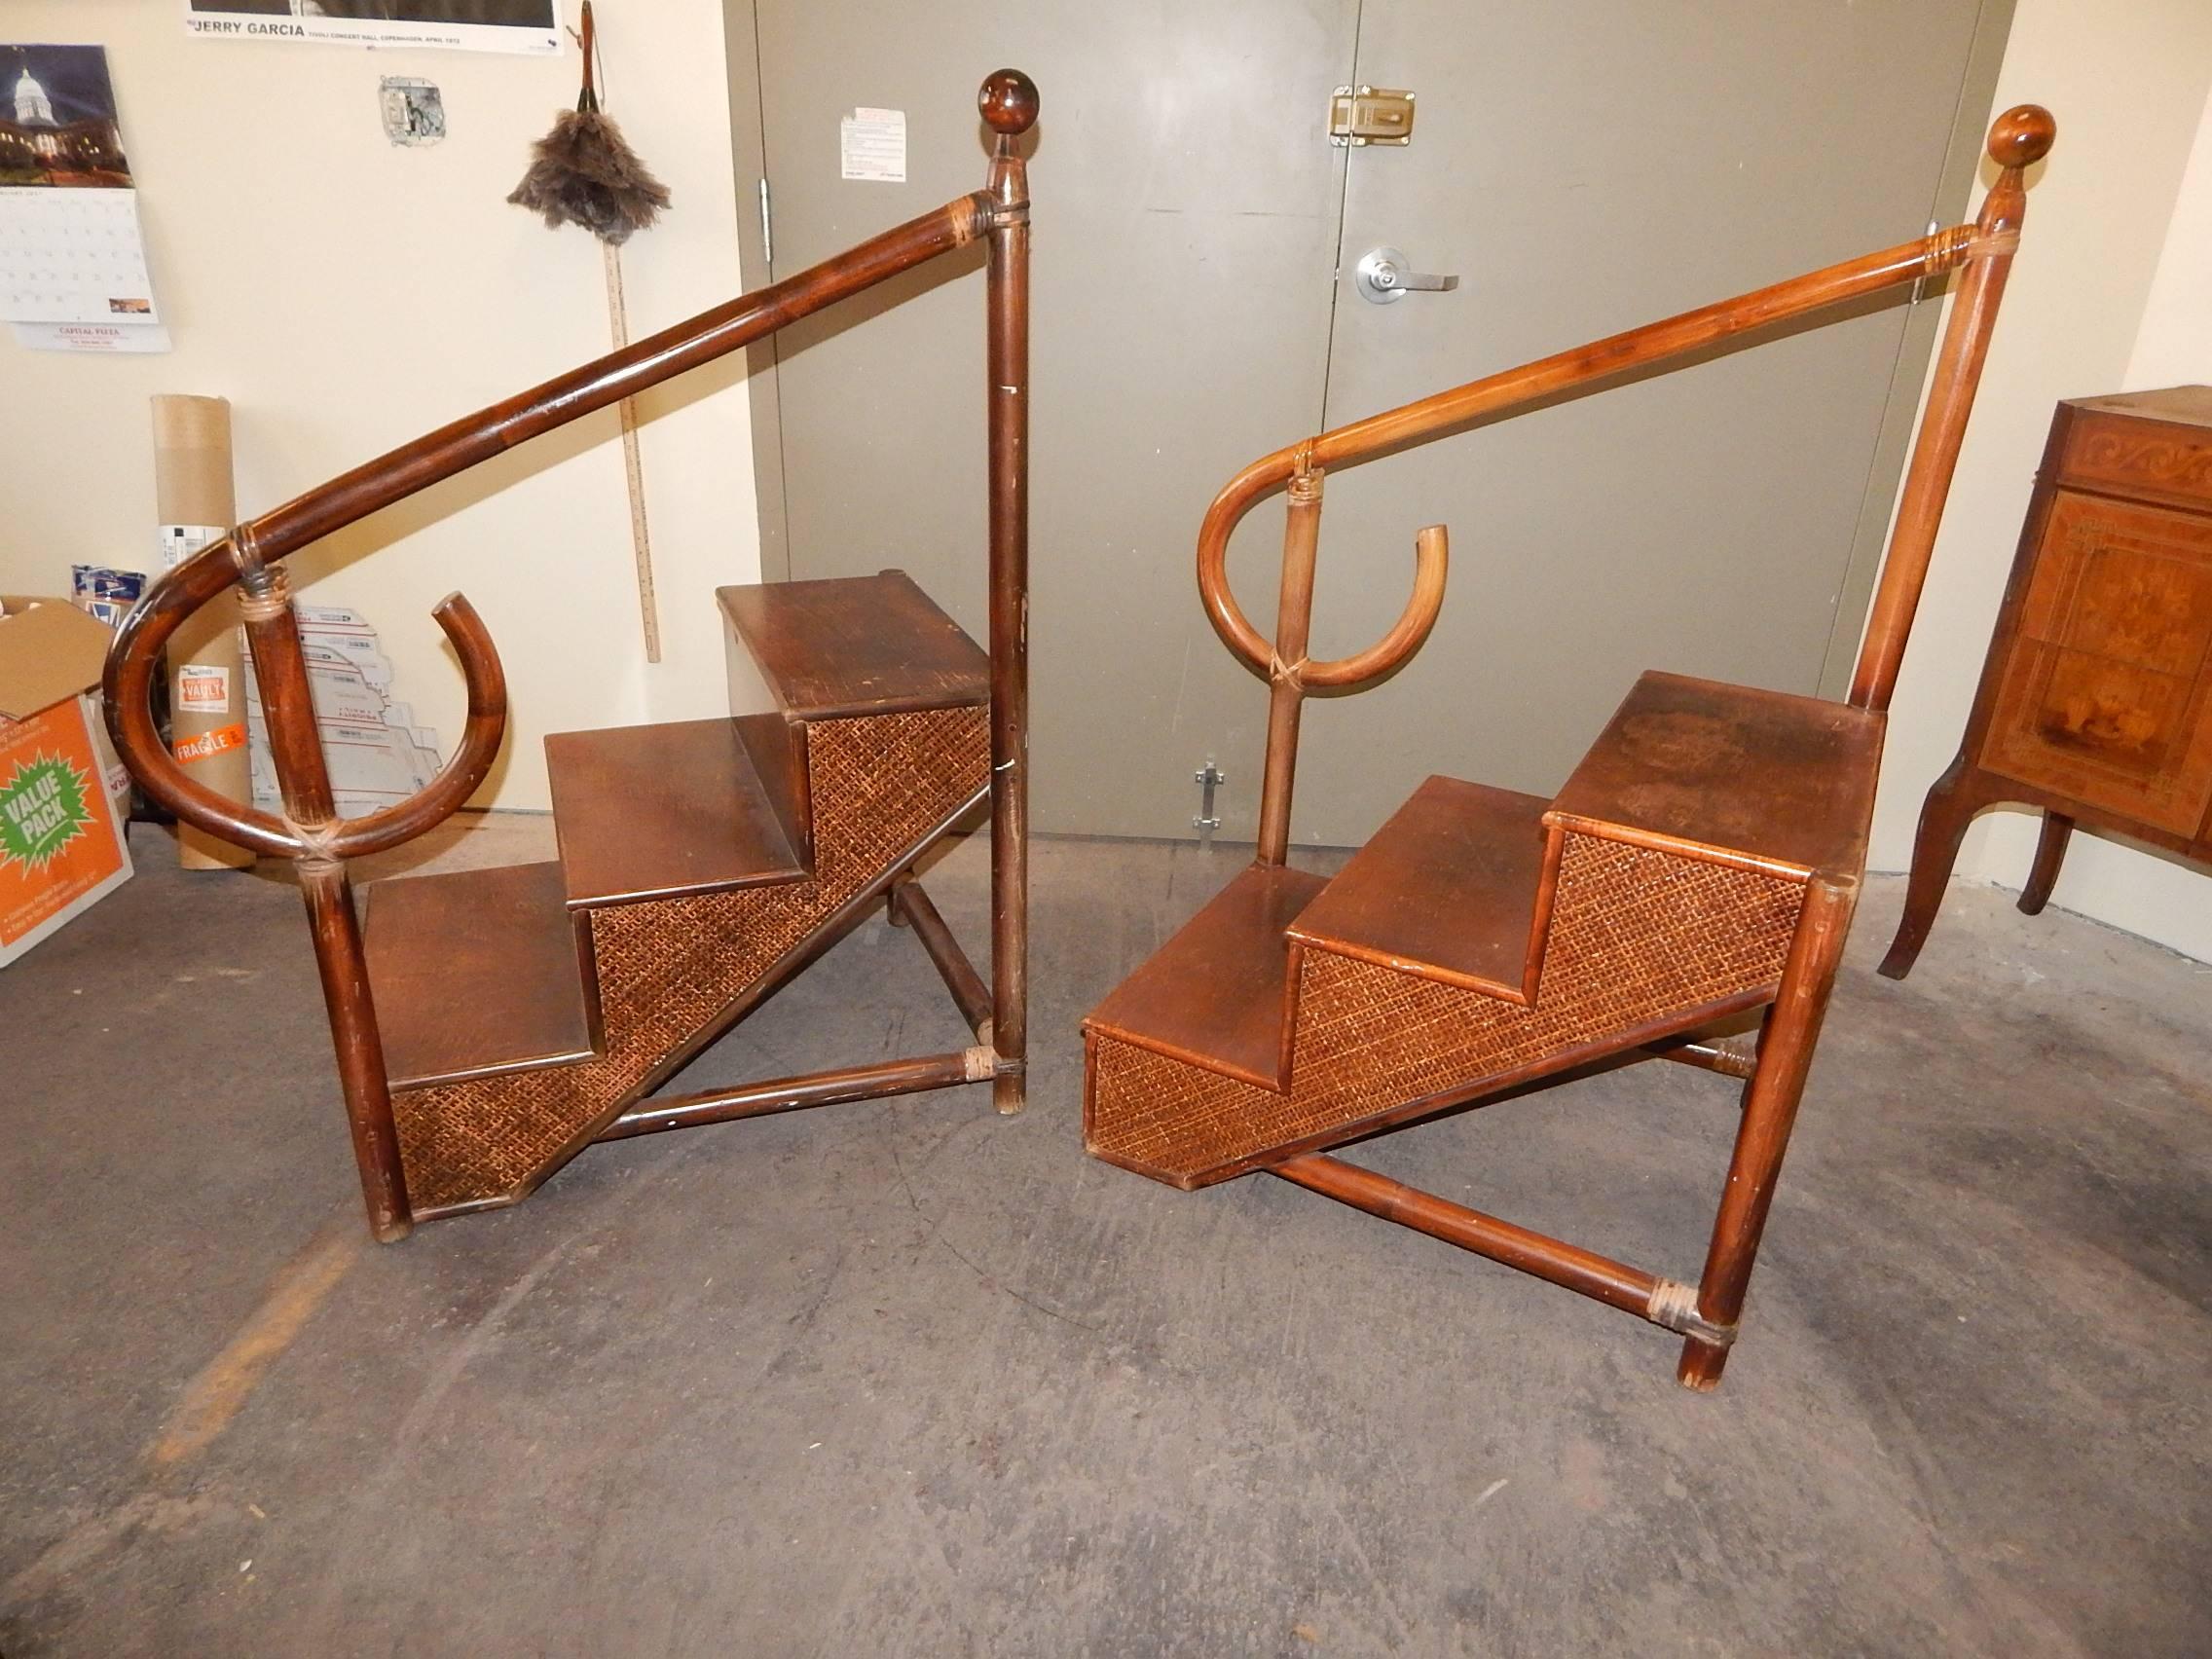 A hard to find and unusual pair of library steps made from bentwood, in faux bamboo style, with wicker panels, along with faux bamboo bentwood banister.